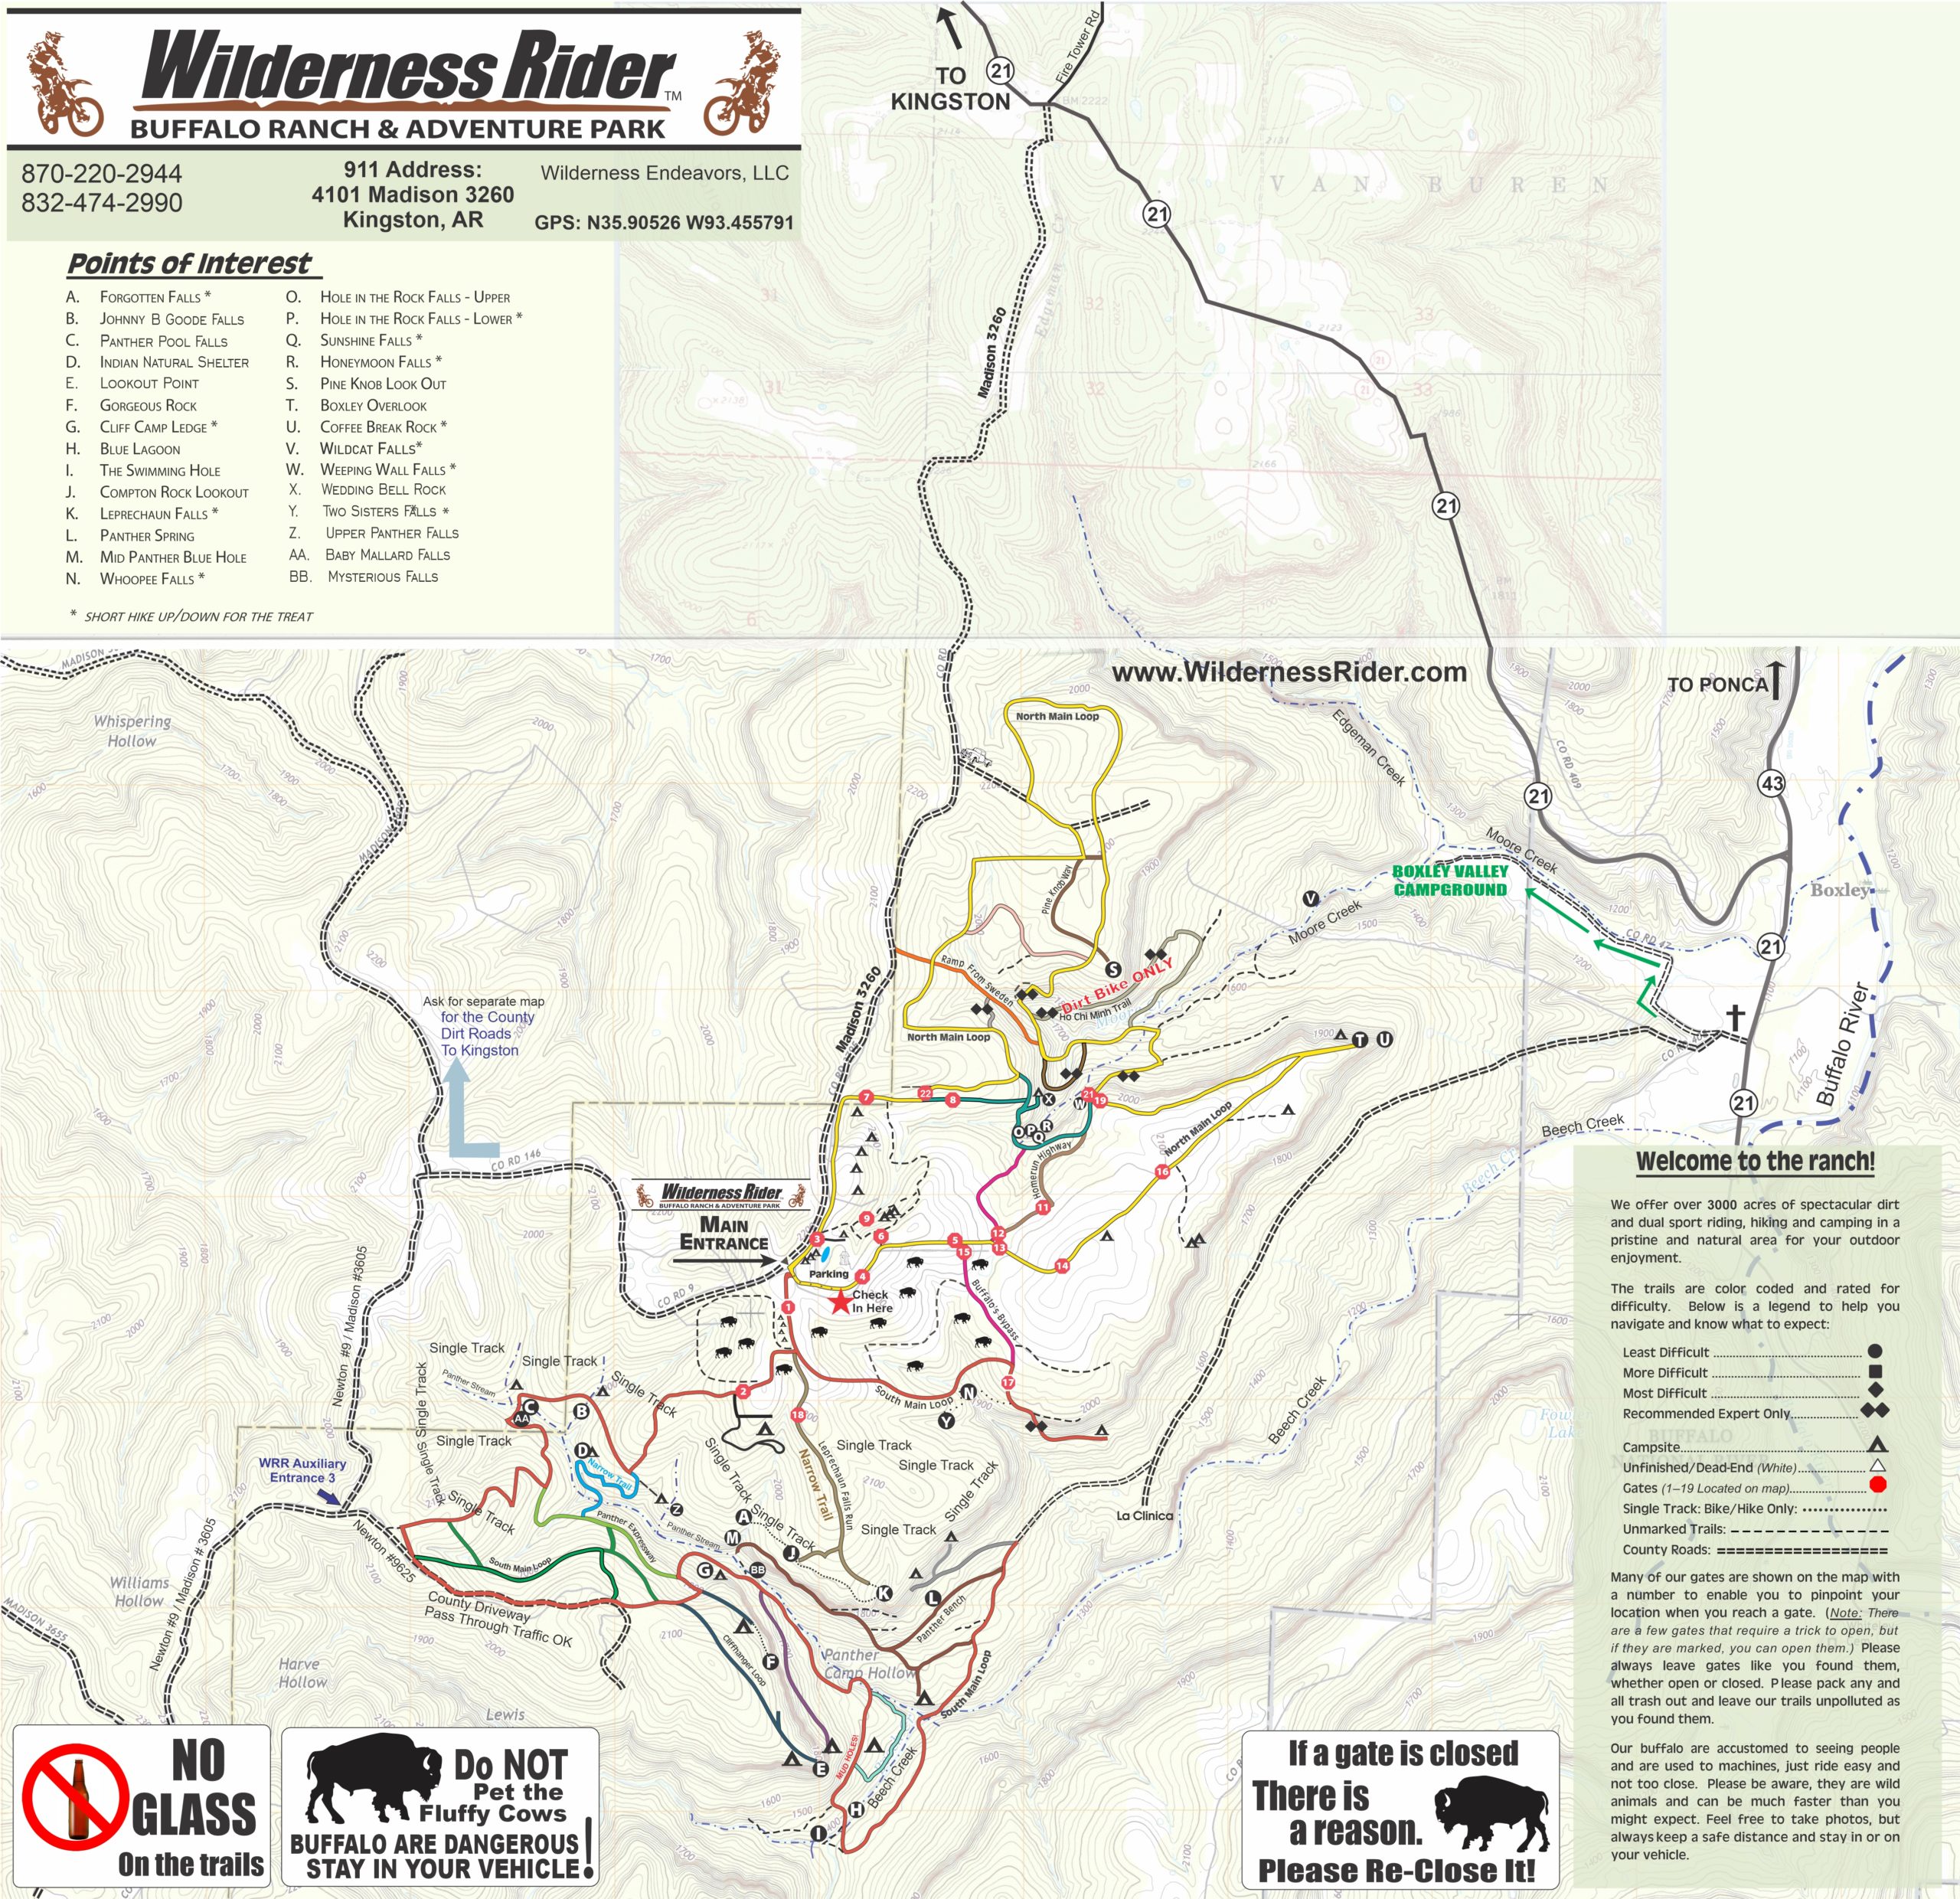 Large map of both campgrounds